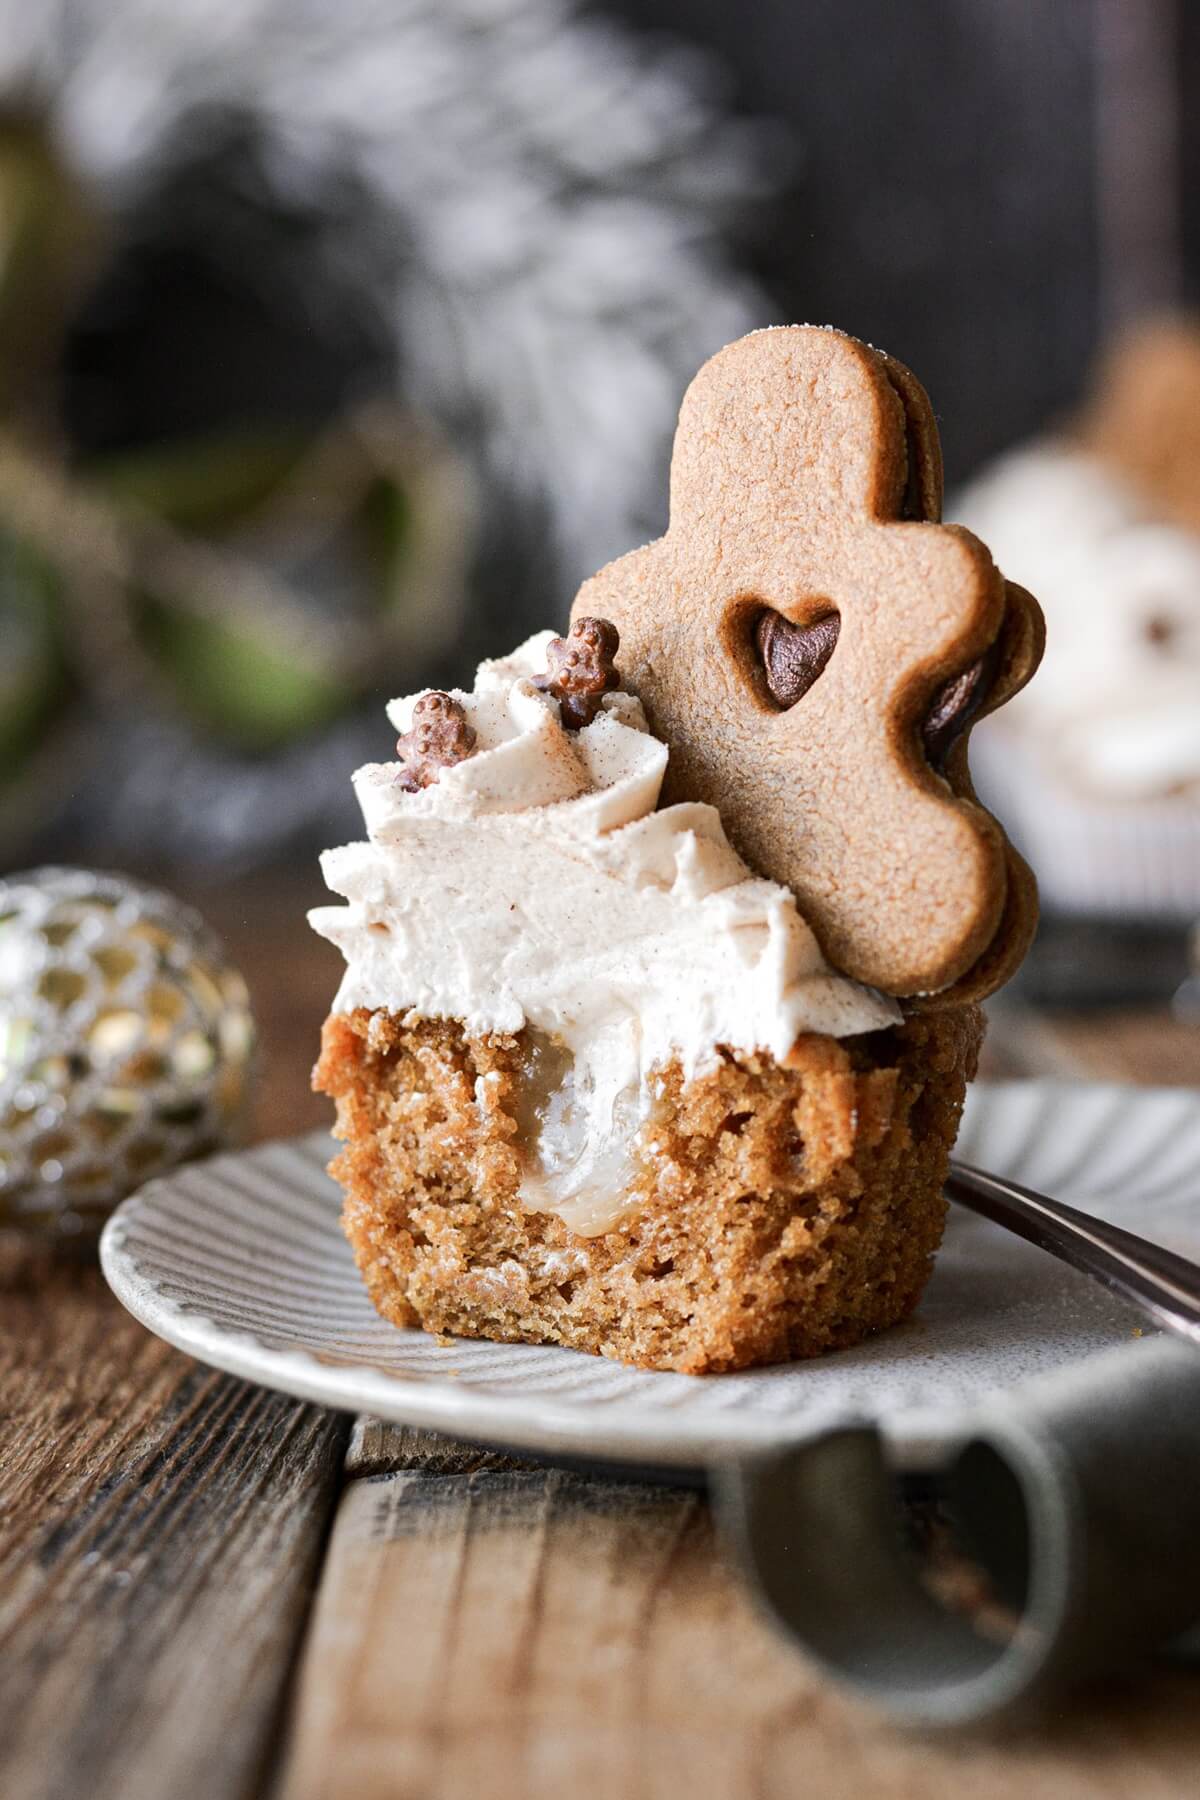 Gingerbread cupcake with lemon curd filling and a cookie on top.